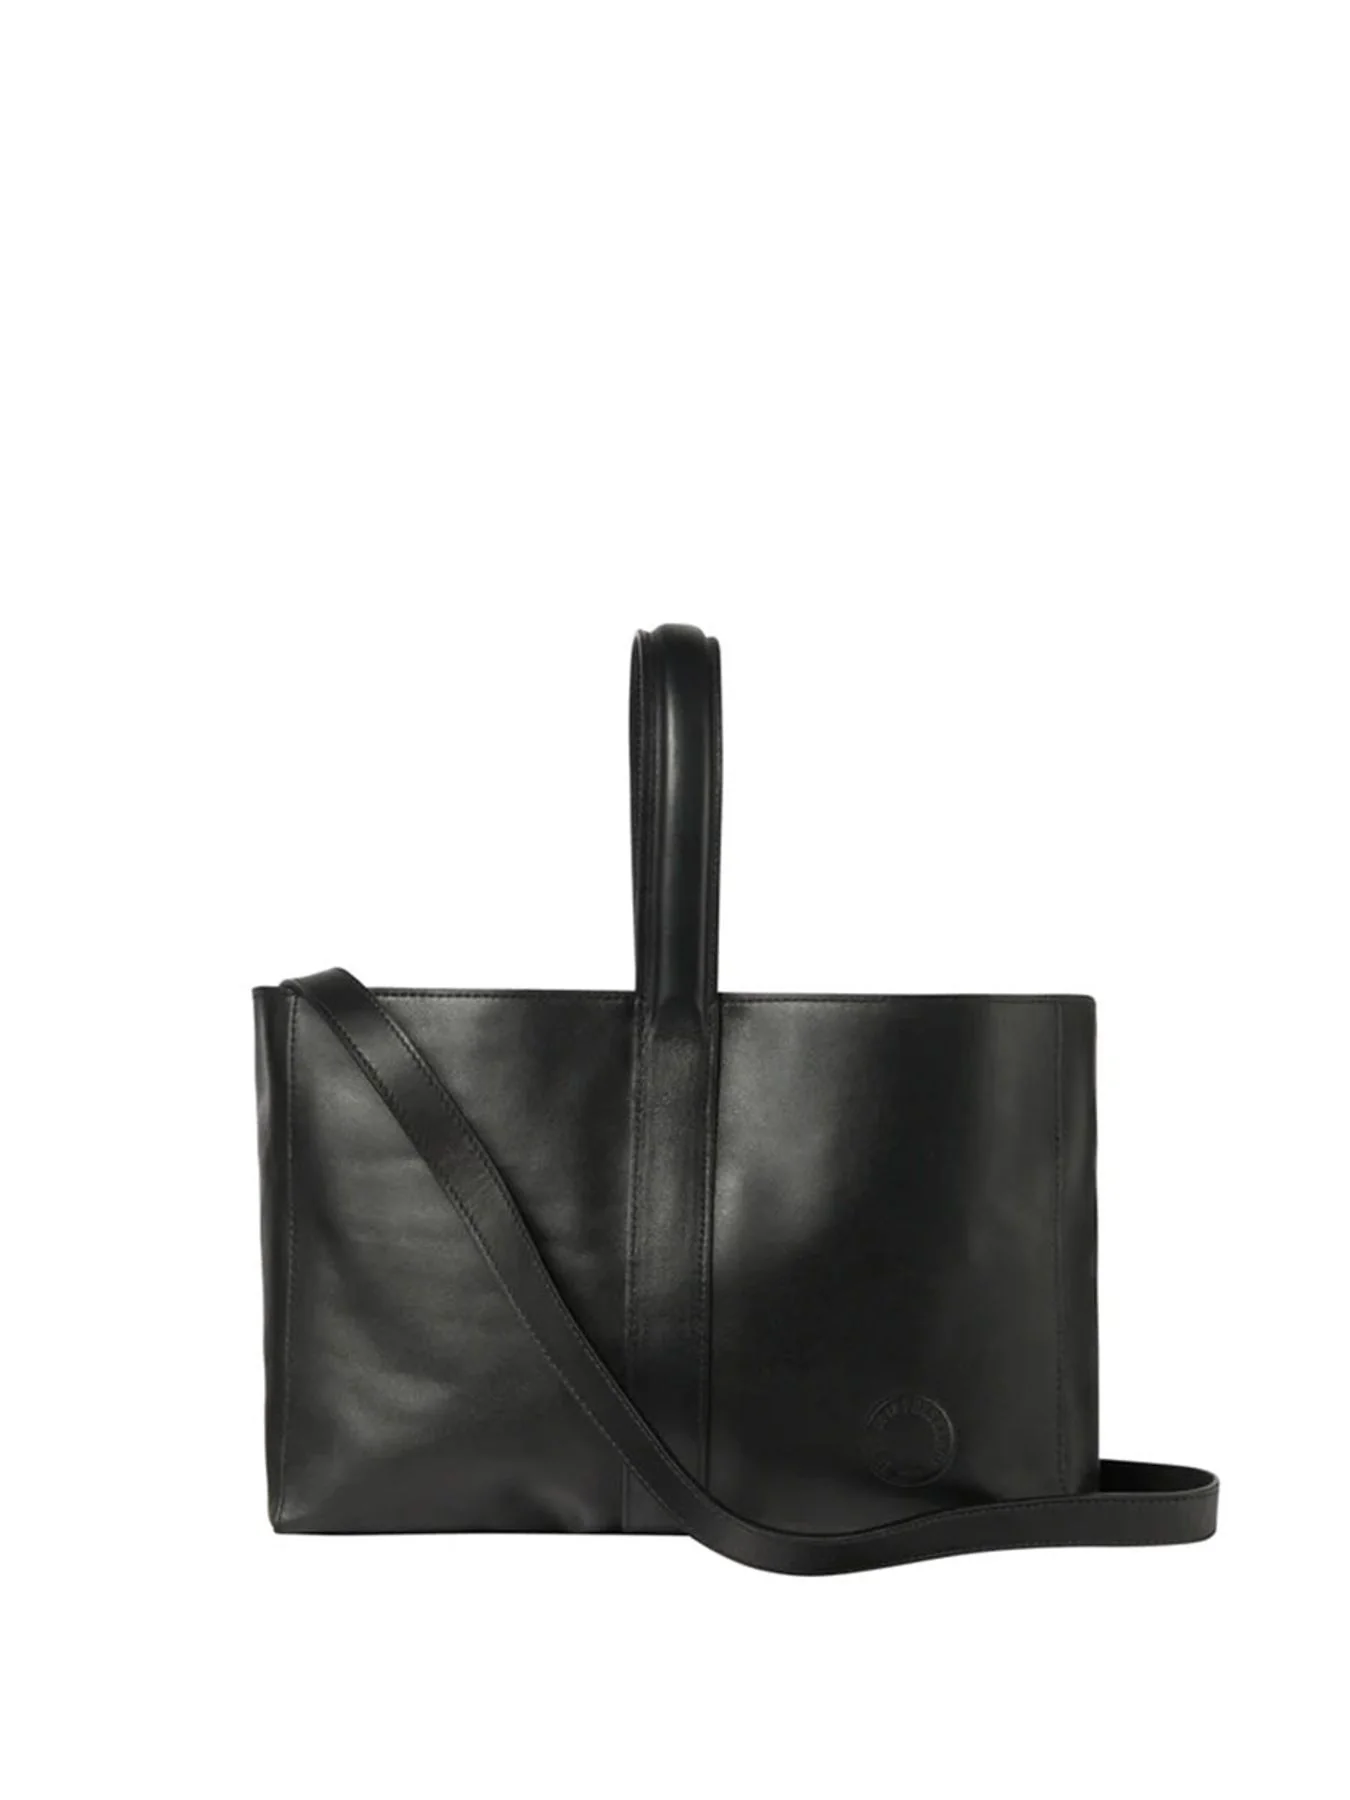 bag-leonore-size-in-leather-black